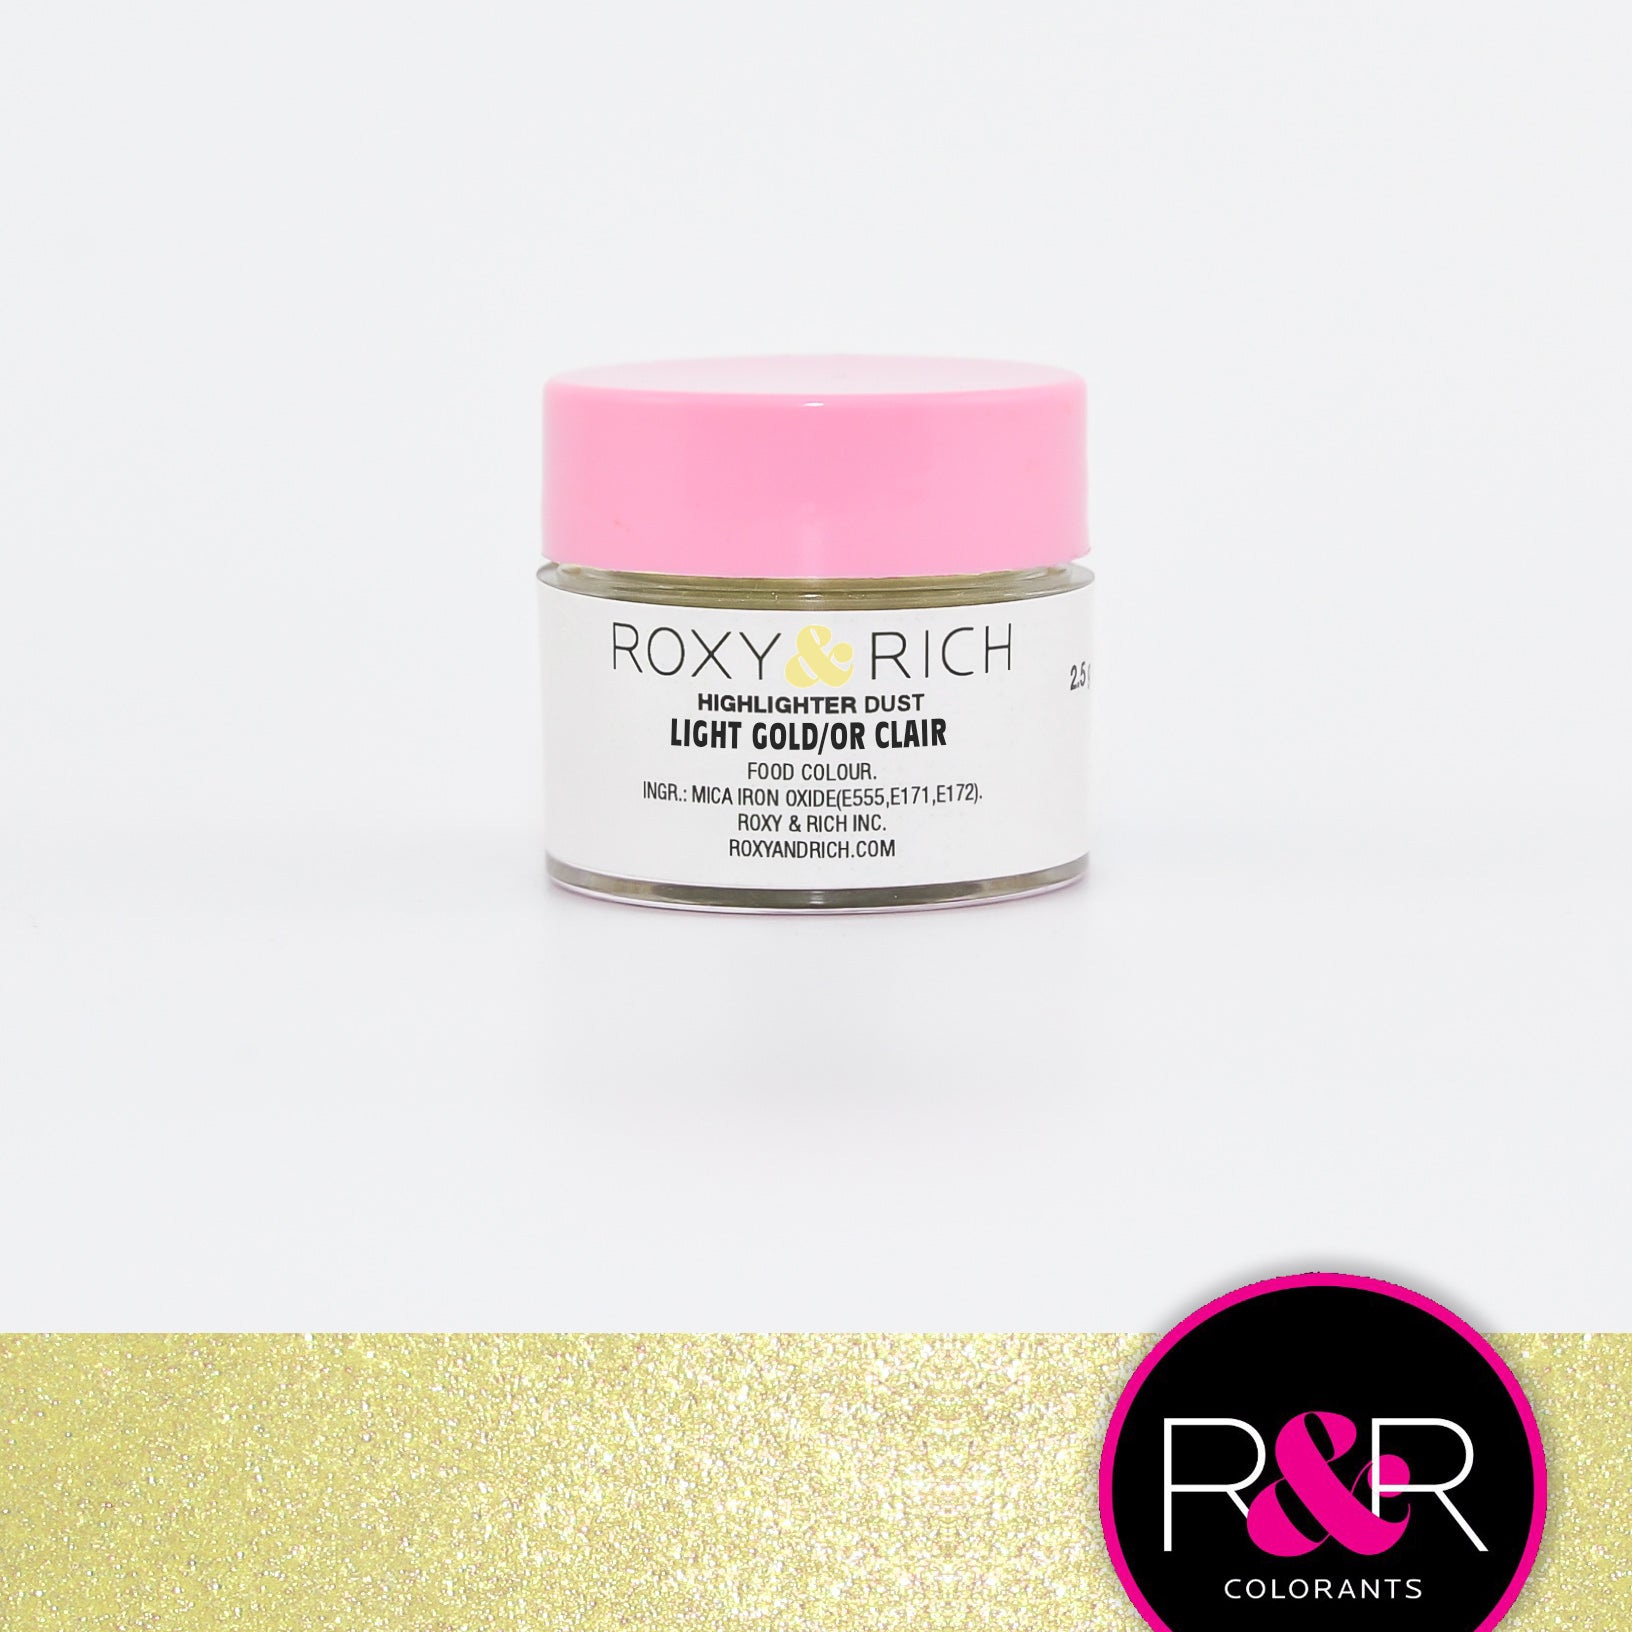 Poudre Highlighter couleur Or Clair    - Roxy & Rich - Poudre Highlighter - 